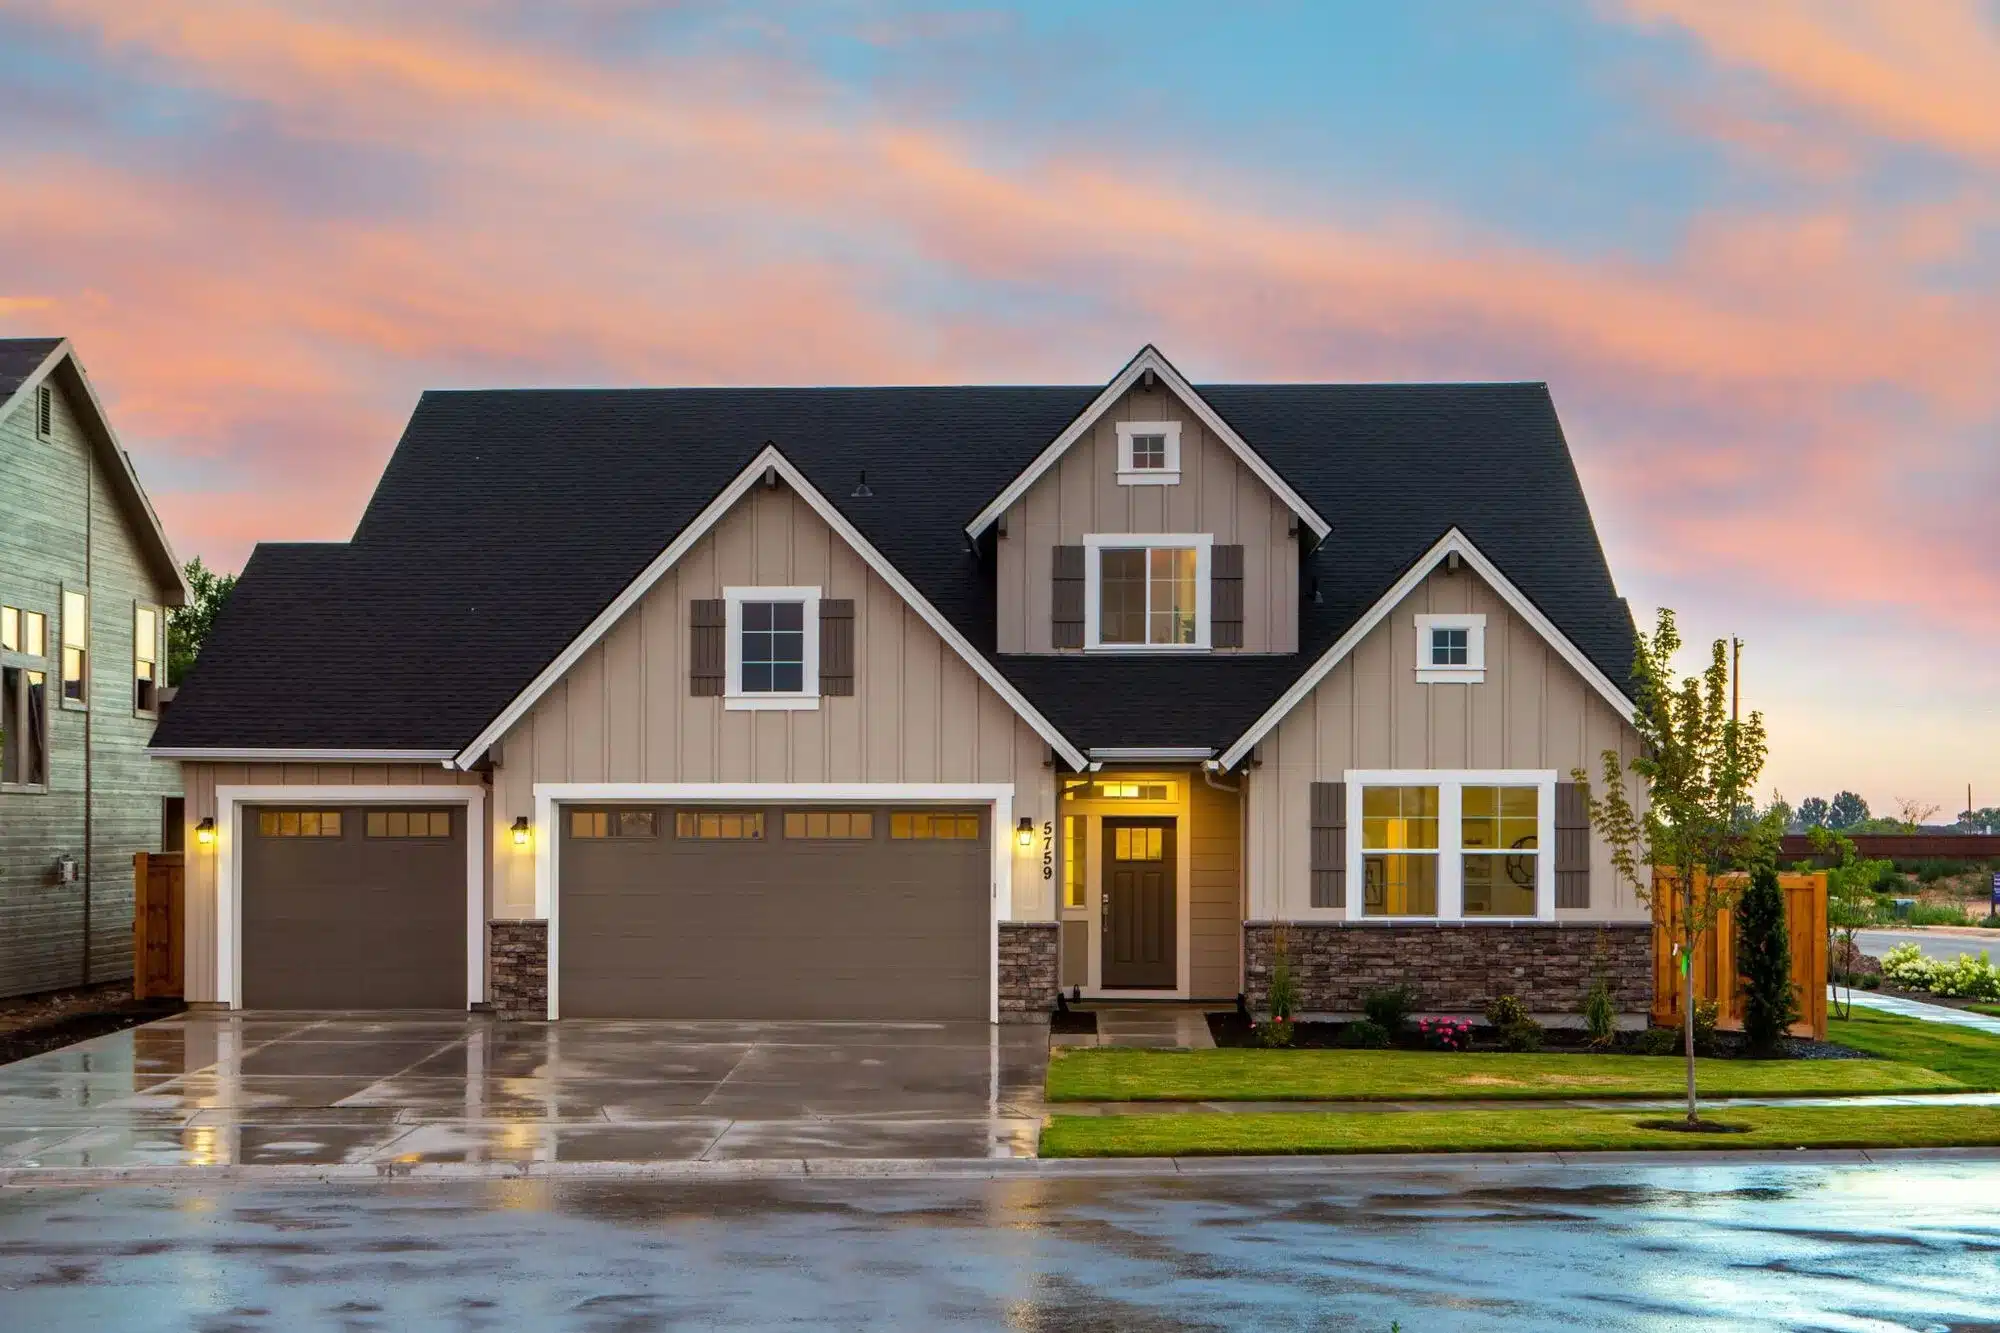 garage door business in media pa for homeowners. When you call our valid phone number a live person who is very knowledgeable will walk you through the reasonable cost and repair services that our technician will be responsible for